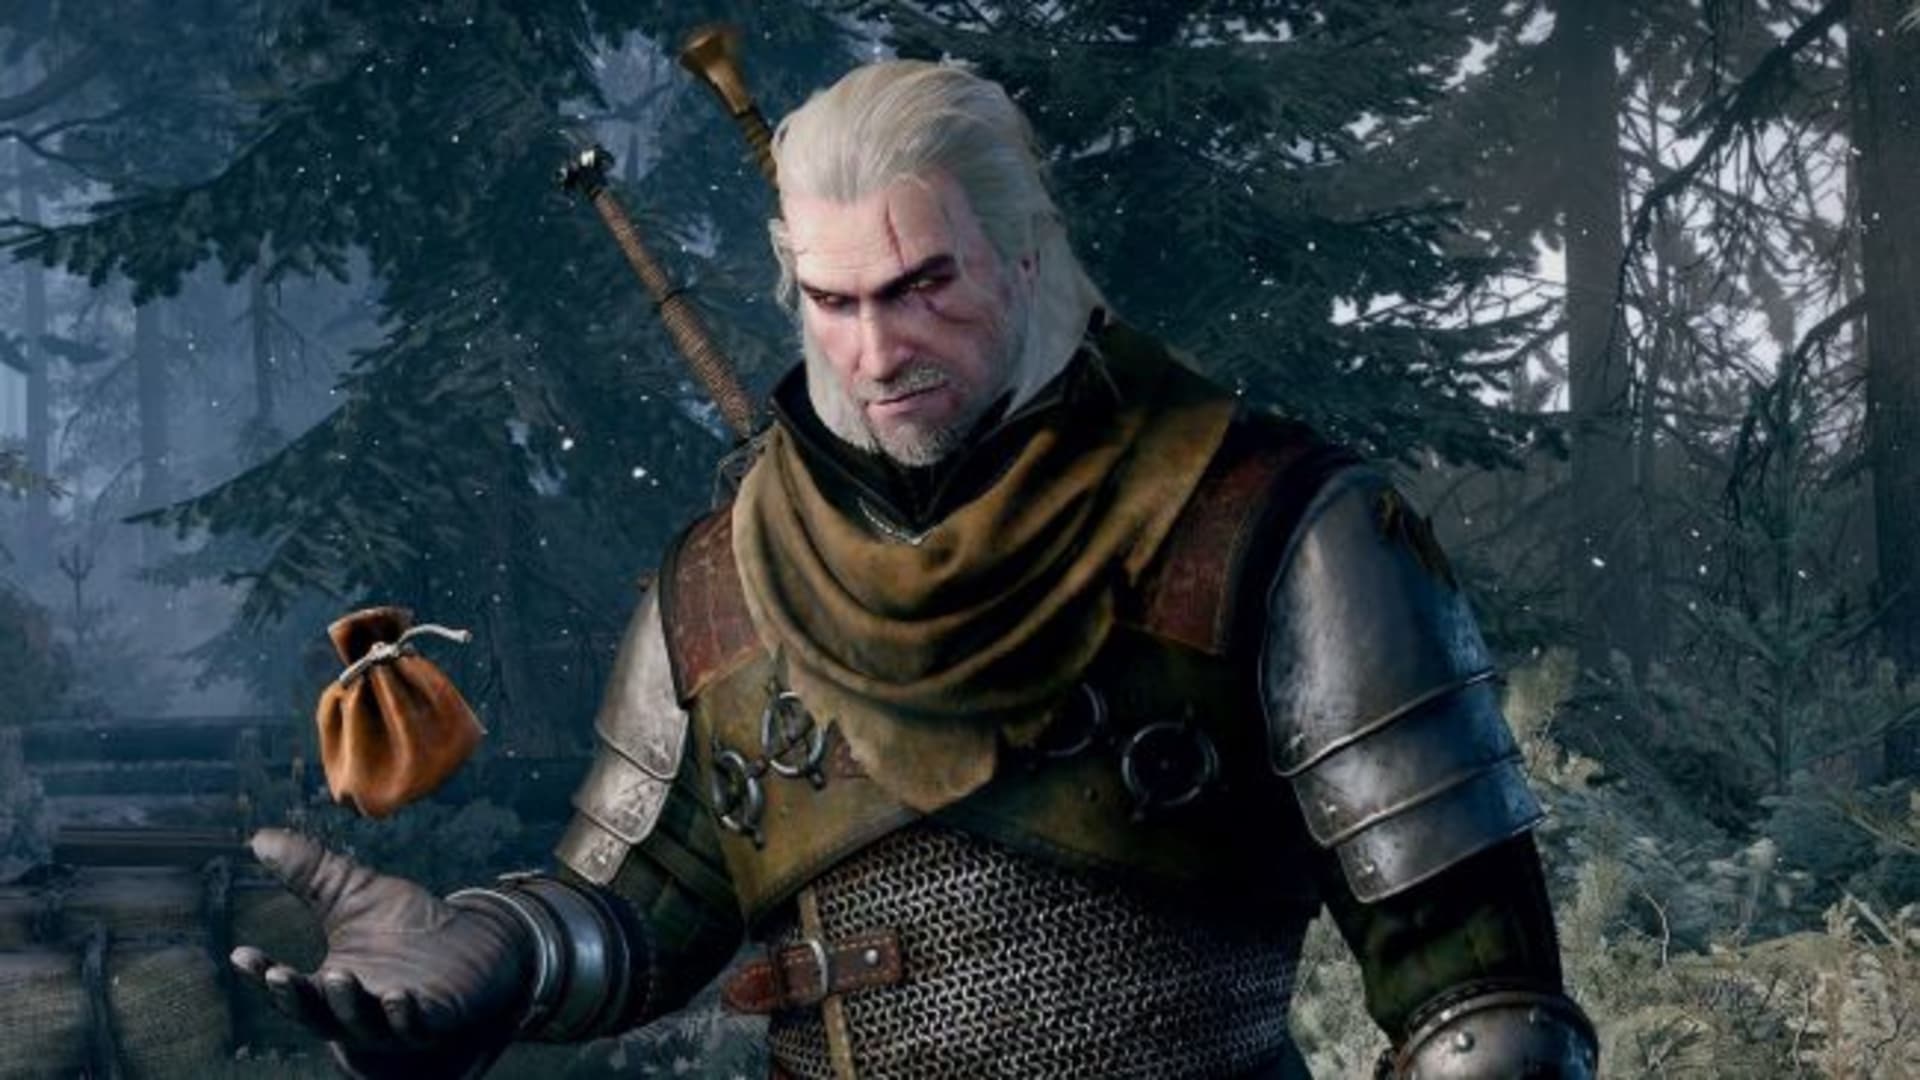  CD Projekt has financially written off and seemingly rebooted development on its Witcher spinoff game 